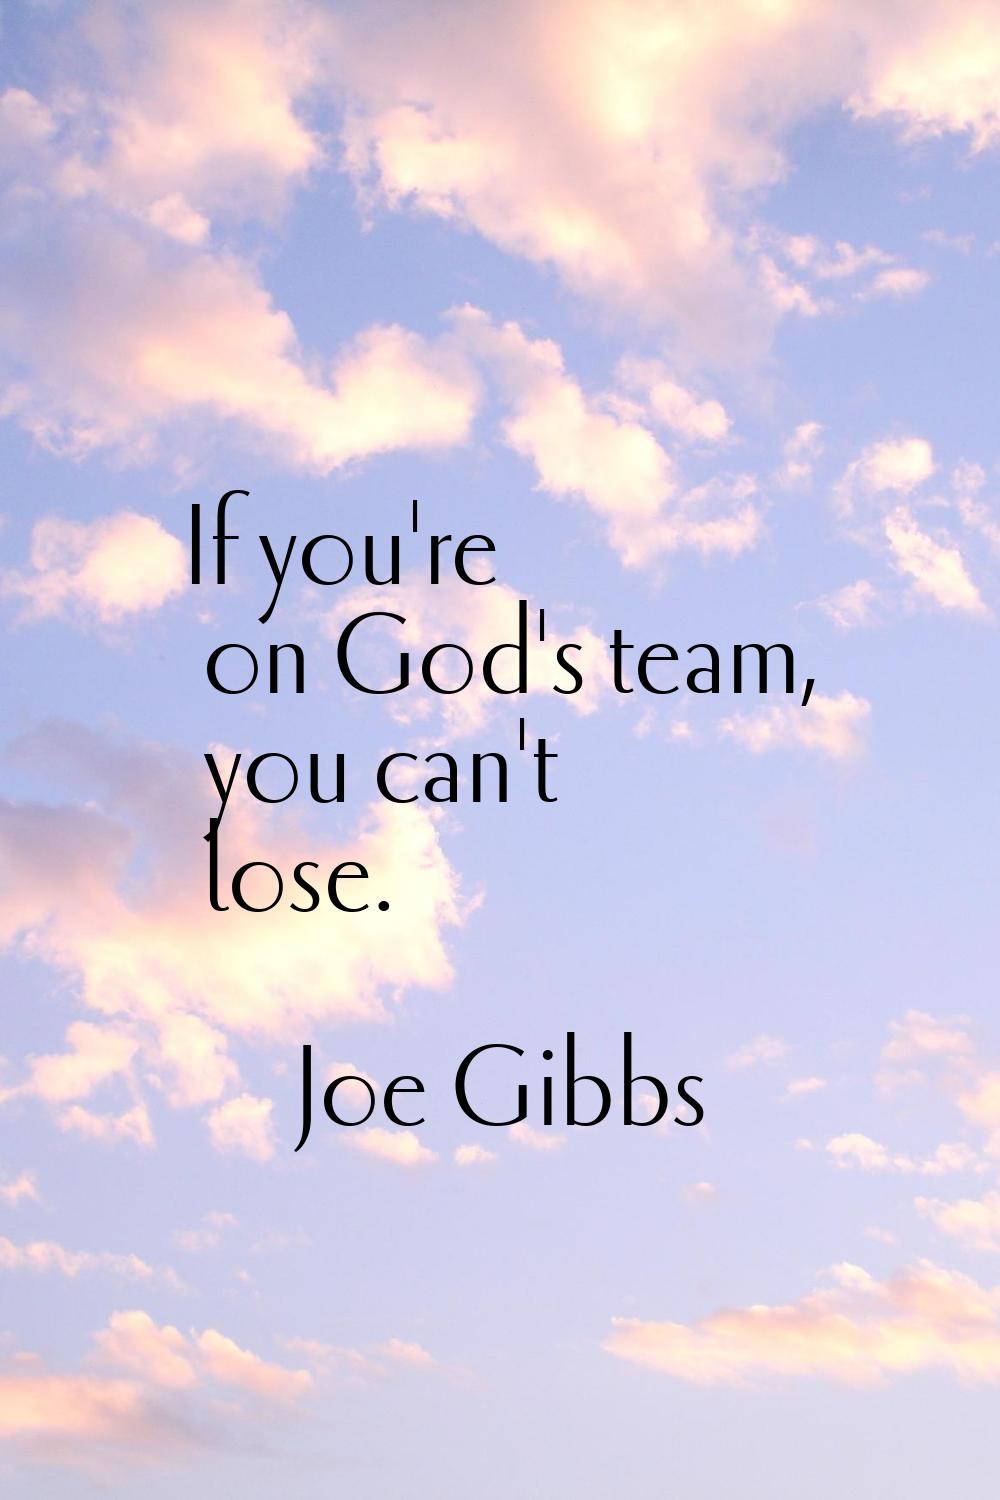 If you're on God's team, you can't lose.